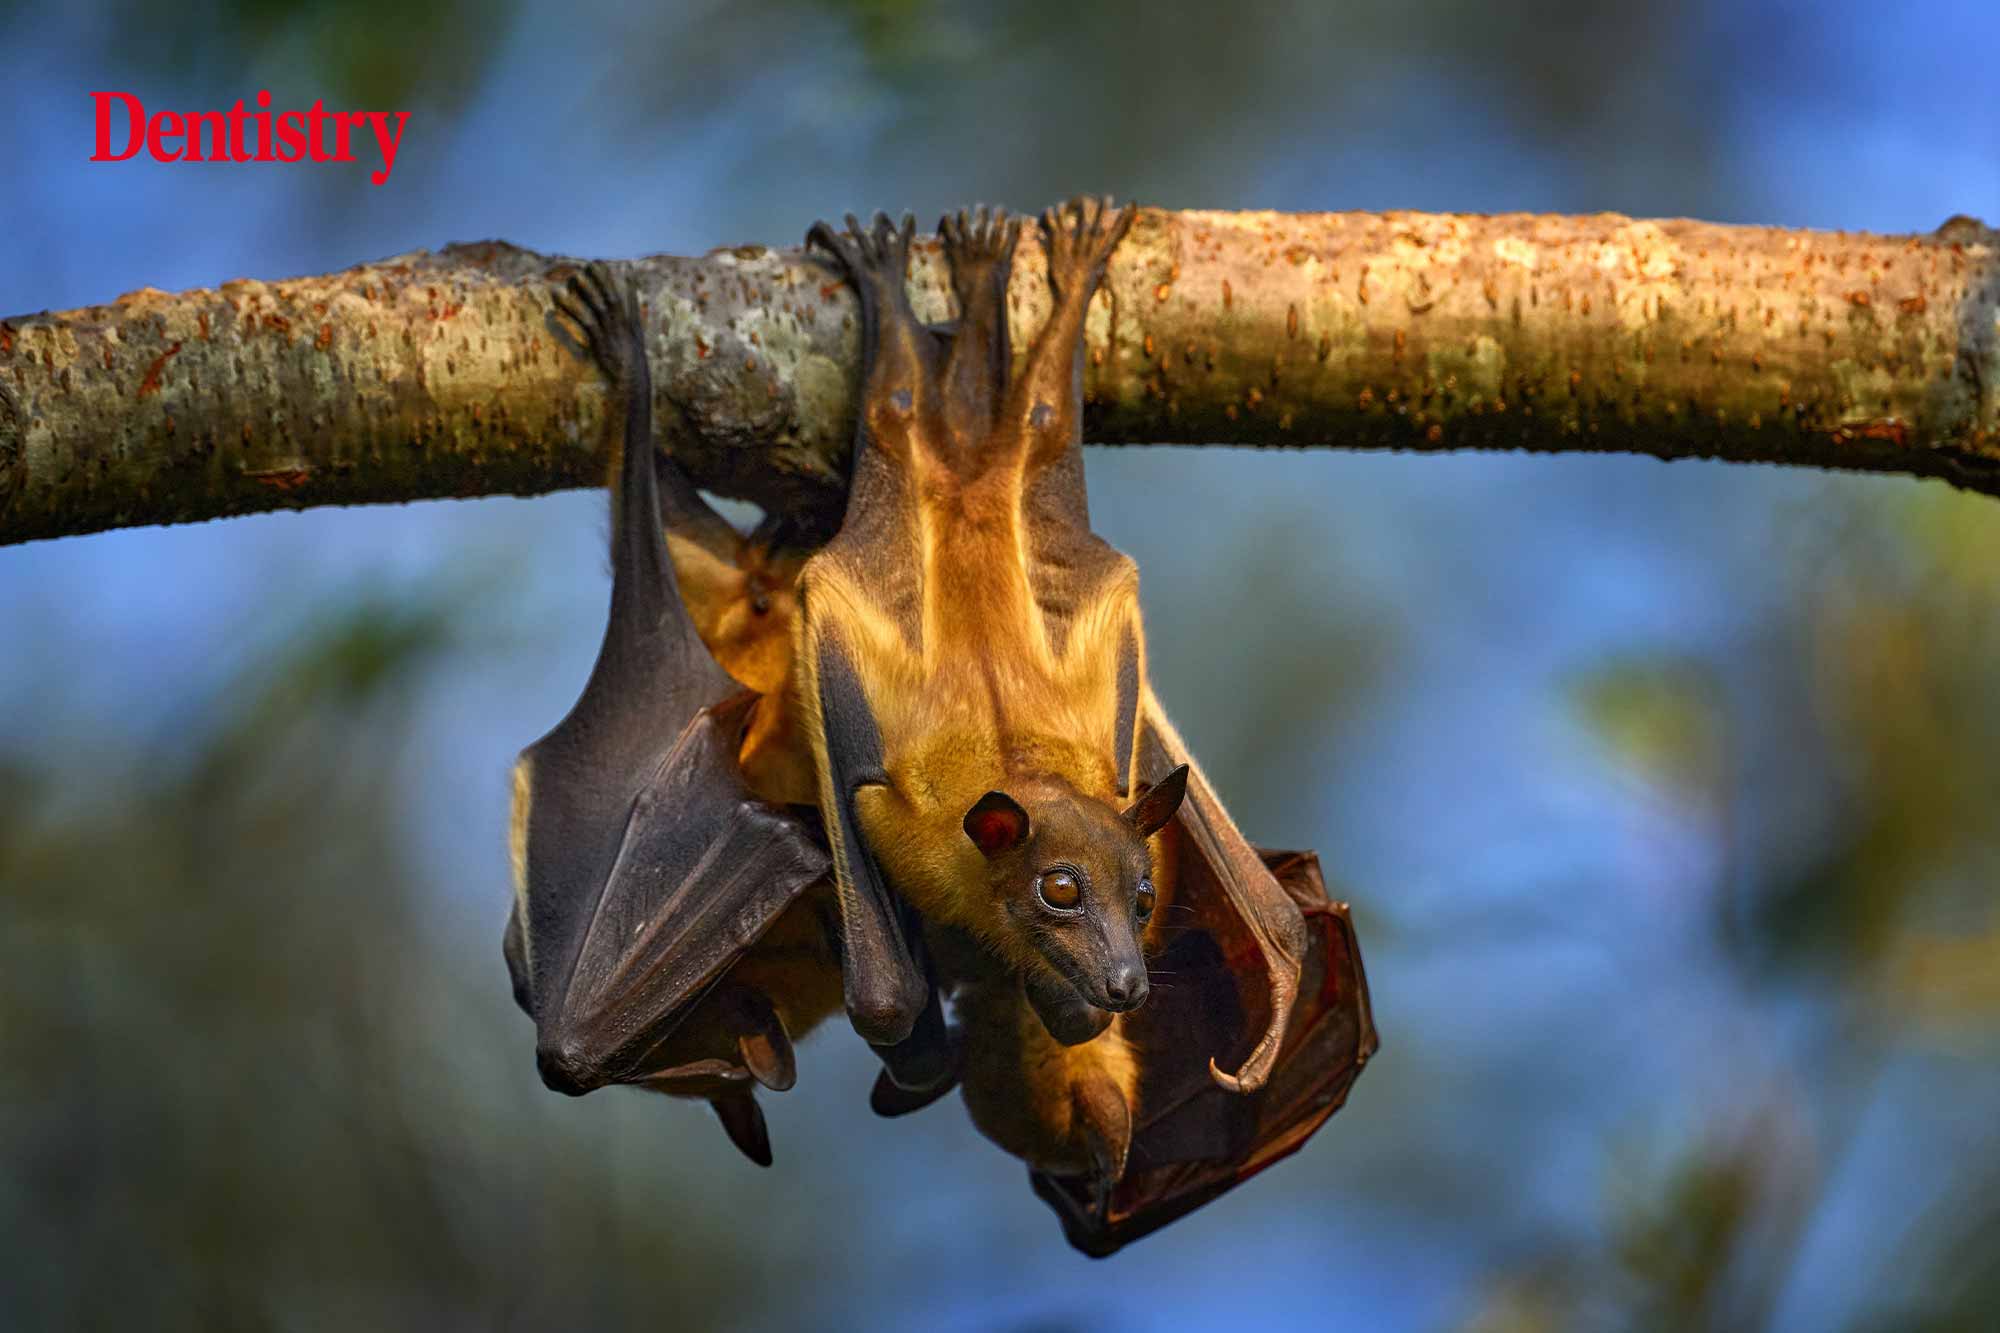 The DNA of fruit bats could help researchers develop a cure for diabetes, according to a new study.